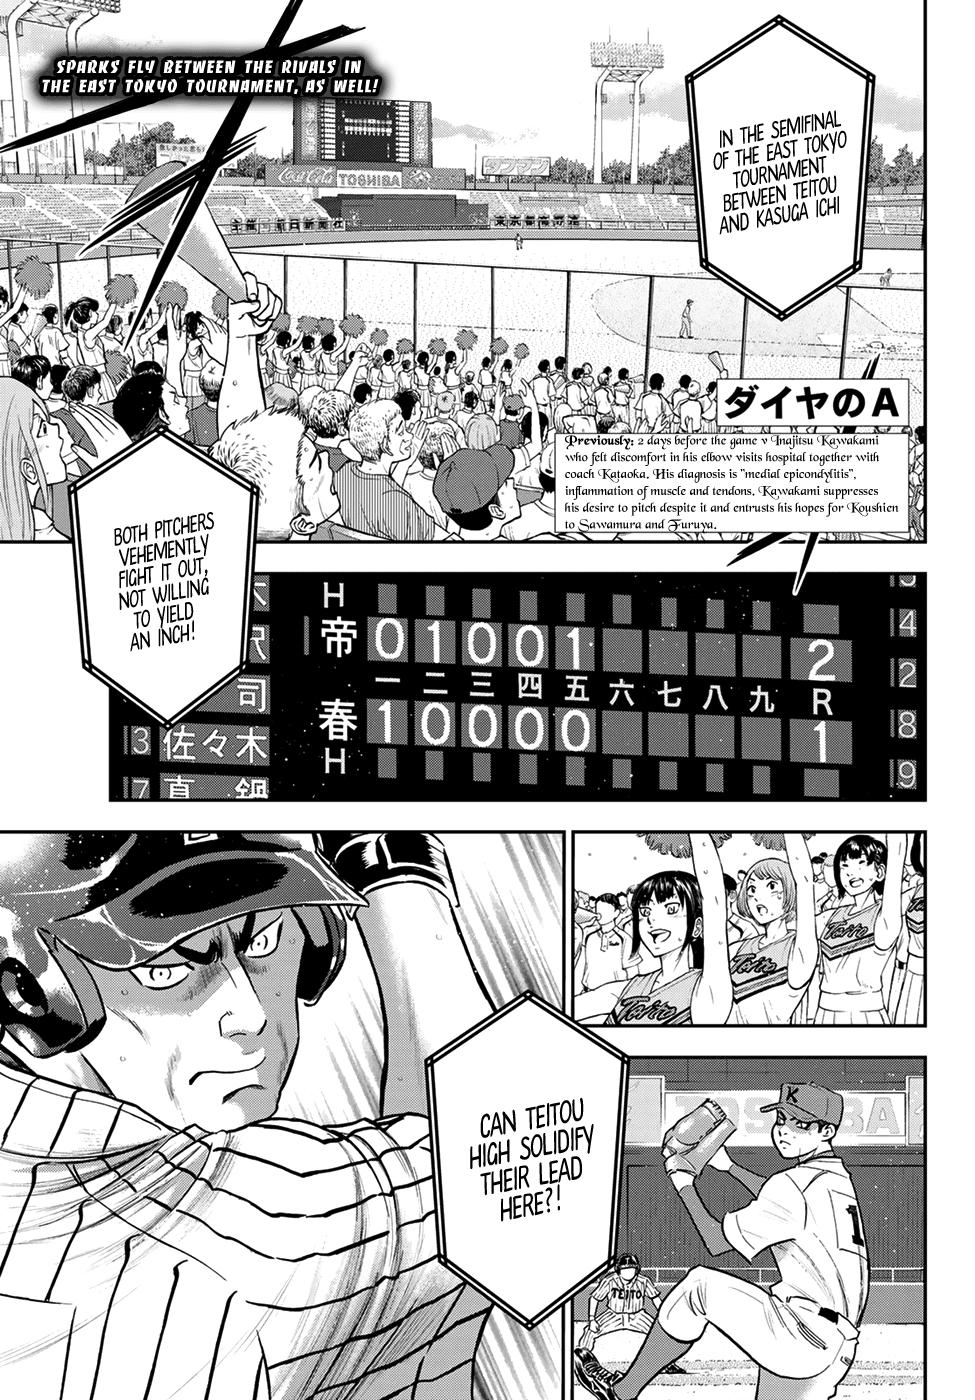 Ace of Diamond Act 3 manga sequel about East Tokyo Finals